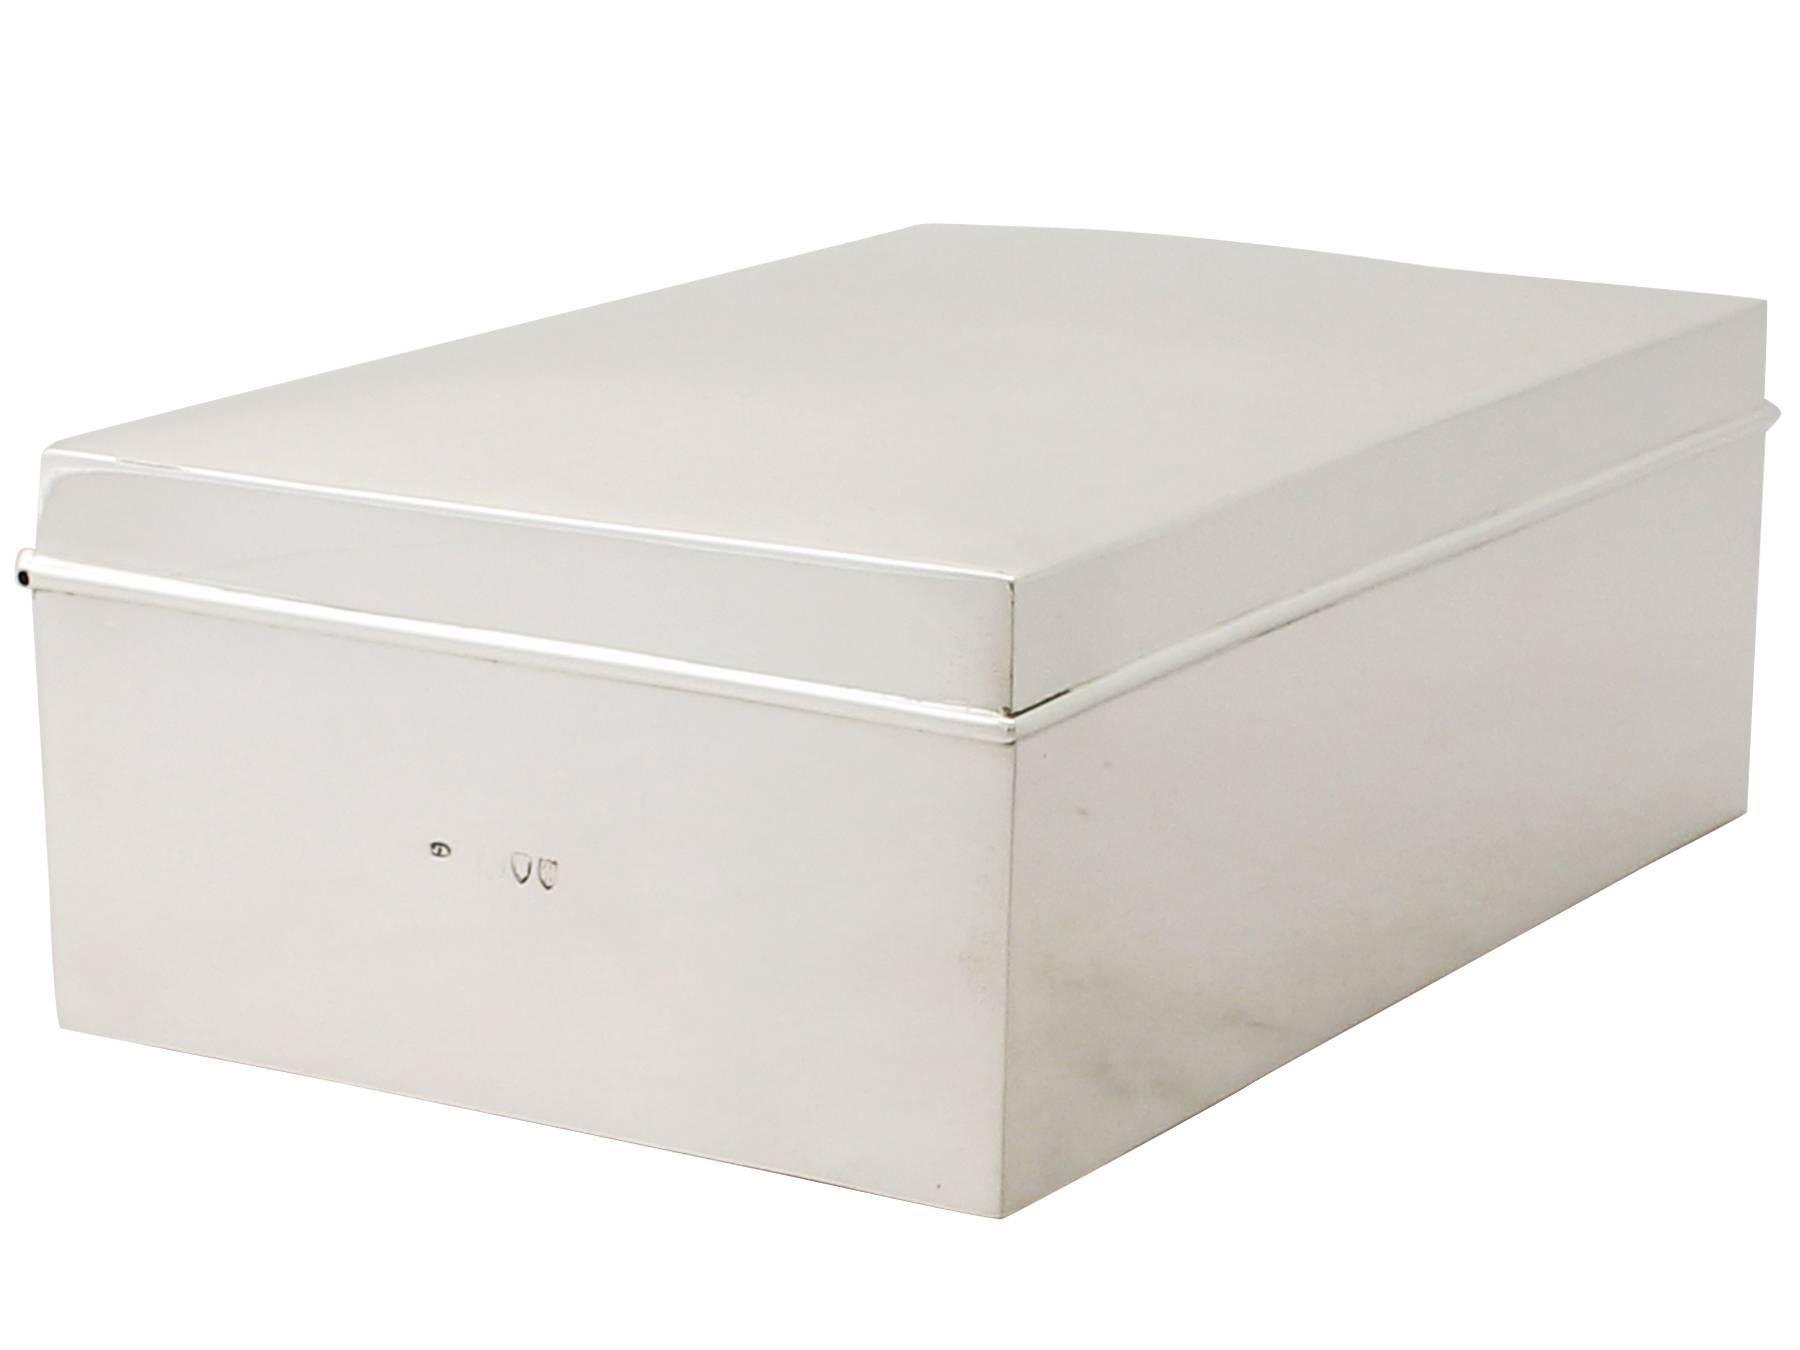 An exceptional, fine and impressive antique Victorian English sterling silver jewellery box; an addition to the ornamental silverware collection.

This exceptional antique Victorian sterling silver jewellery box has a plain rectangular subtly